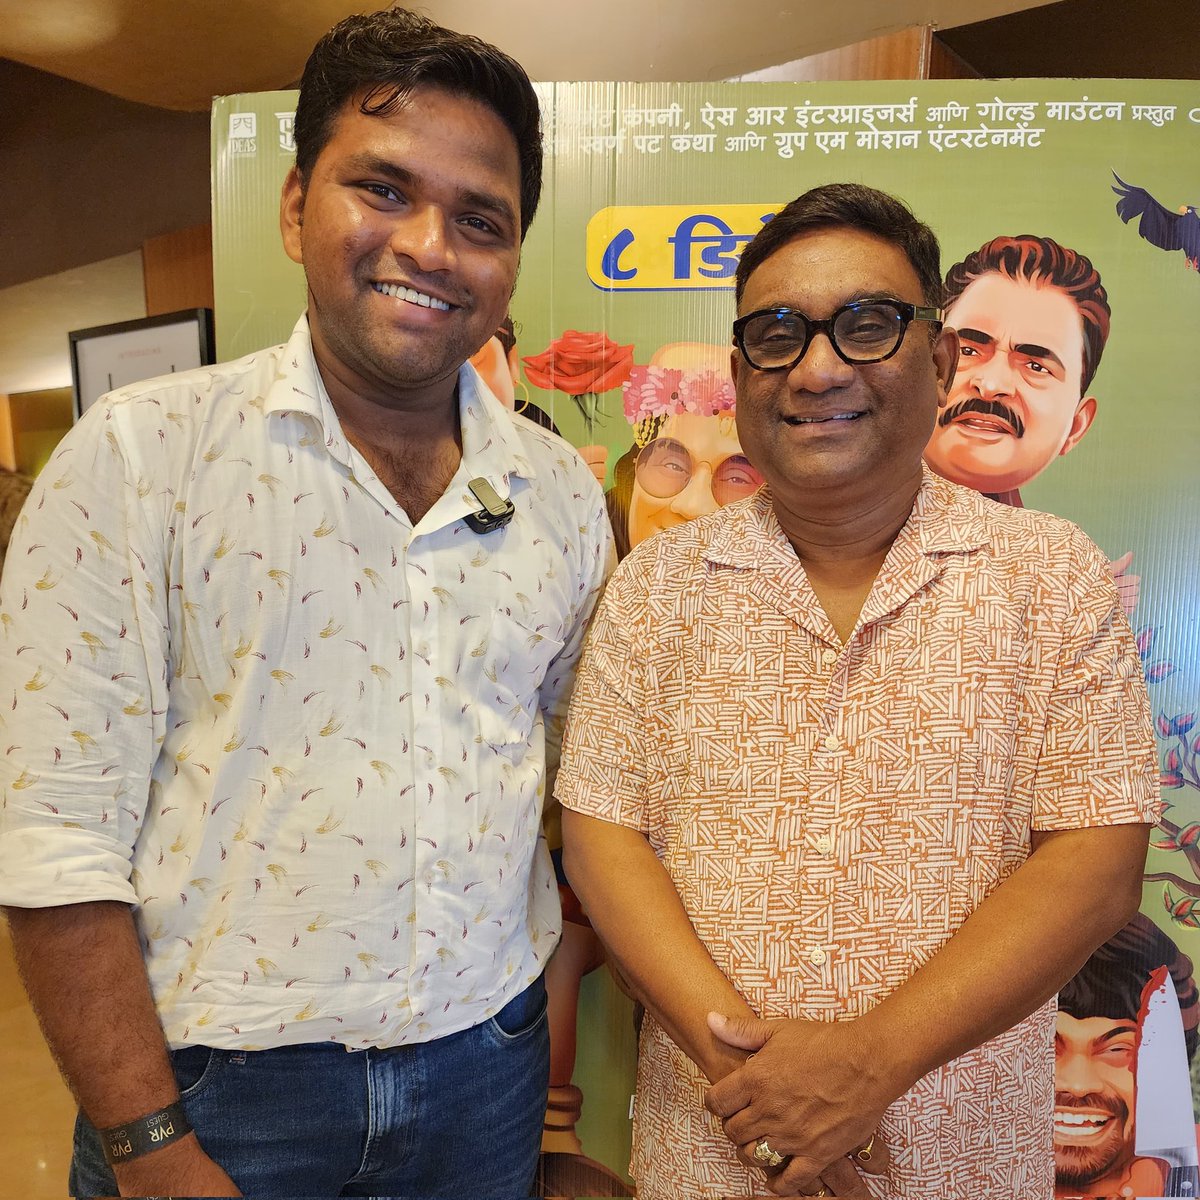 Here I clicked with Everyone 's Fav #BhauKadam Post #EkdaTarYeunBagha Grand Trailer Launch, its Privilege to click with this man . . #Pwnsakat #BhauKadam #EkdaTarYeunBagha #TrailerLaunch